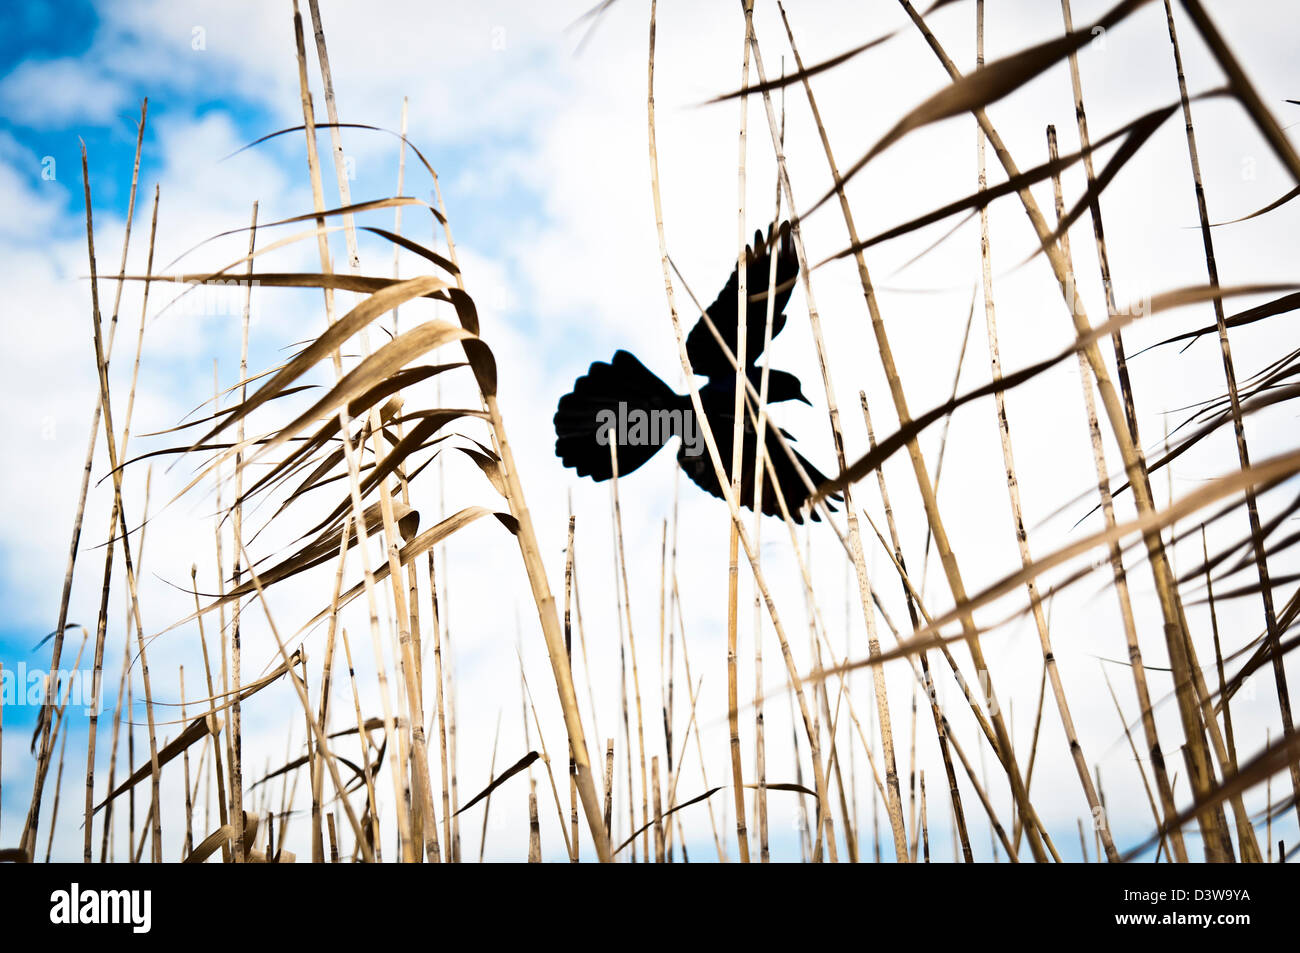 Silhouette of a bird flying above reeds with blue sky and clouds Stock Photo